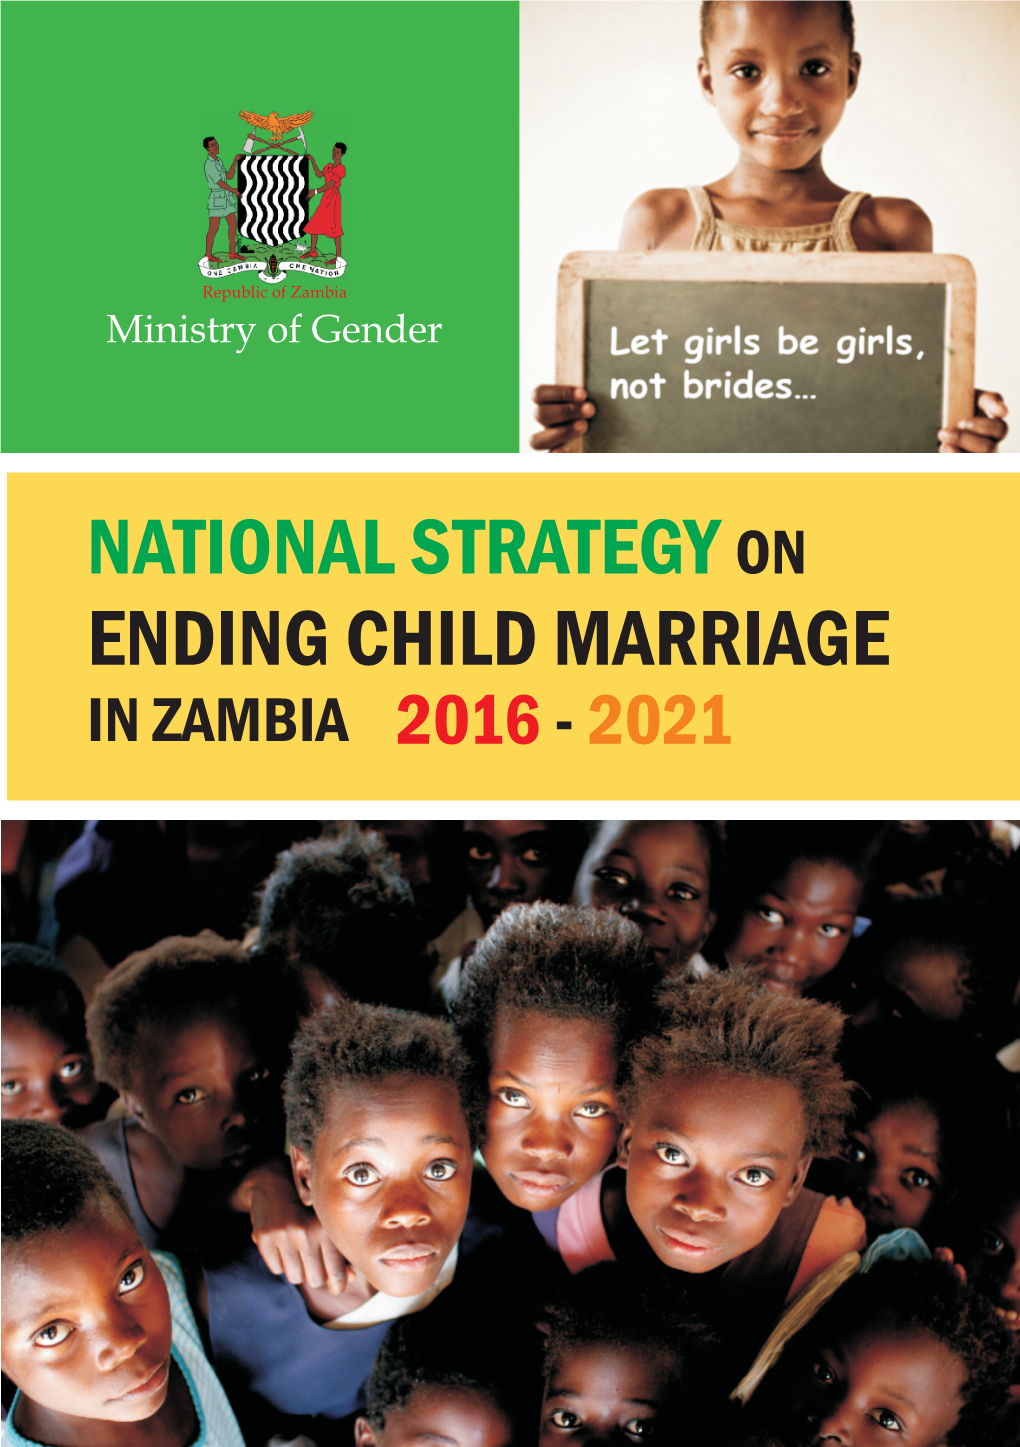 National Strategy on Ending Child Marriage in Zambia 2016 – 2021